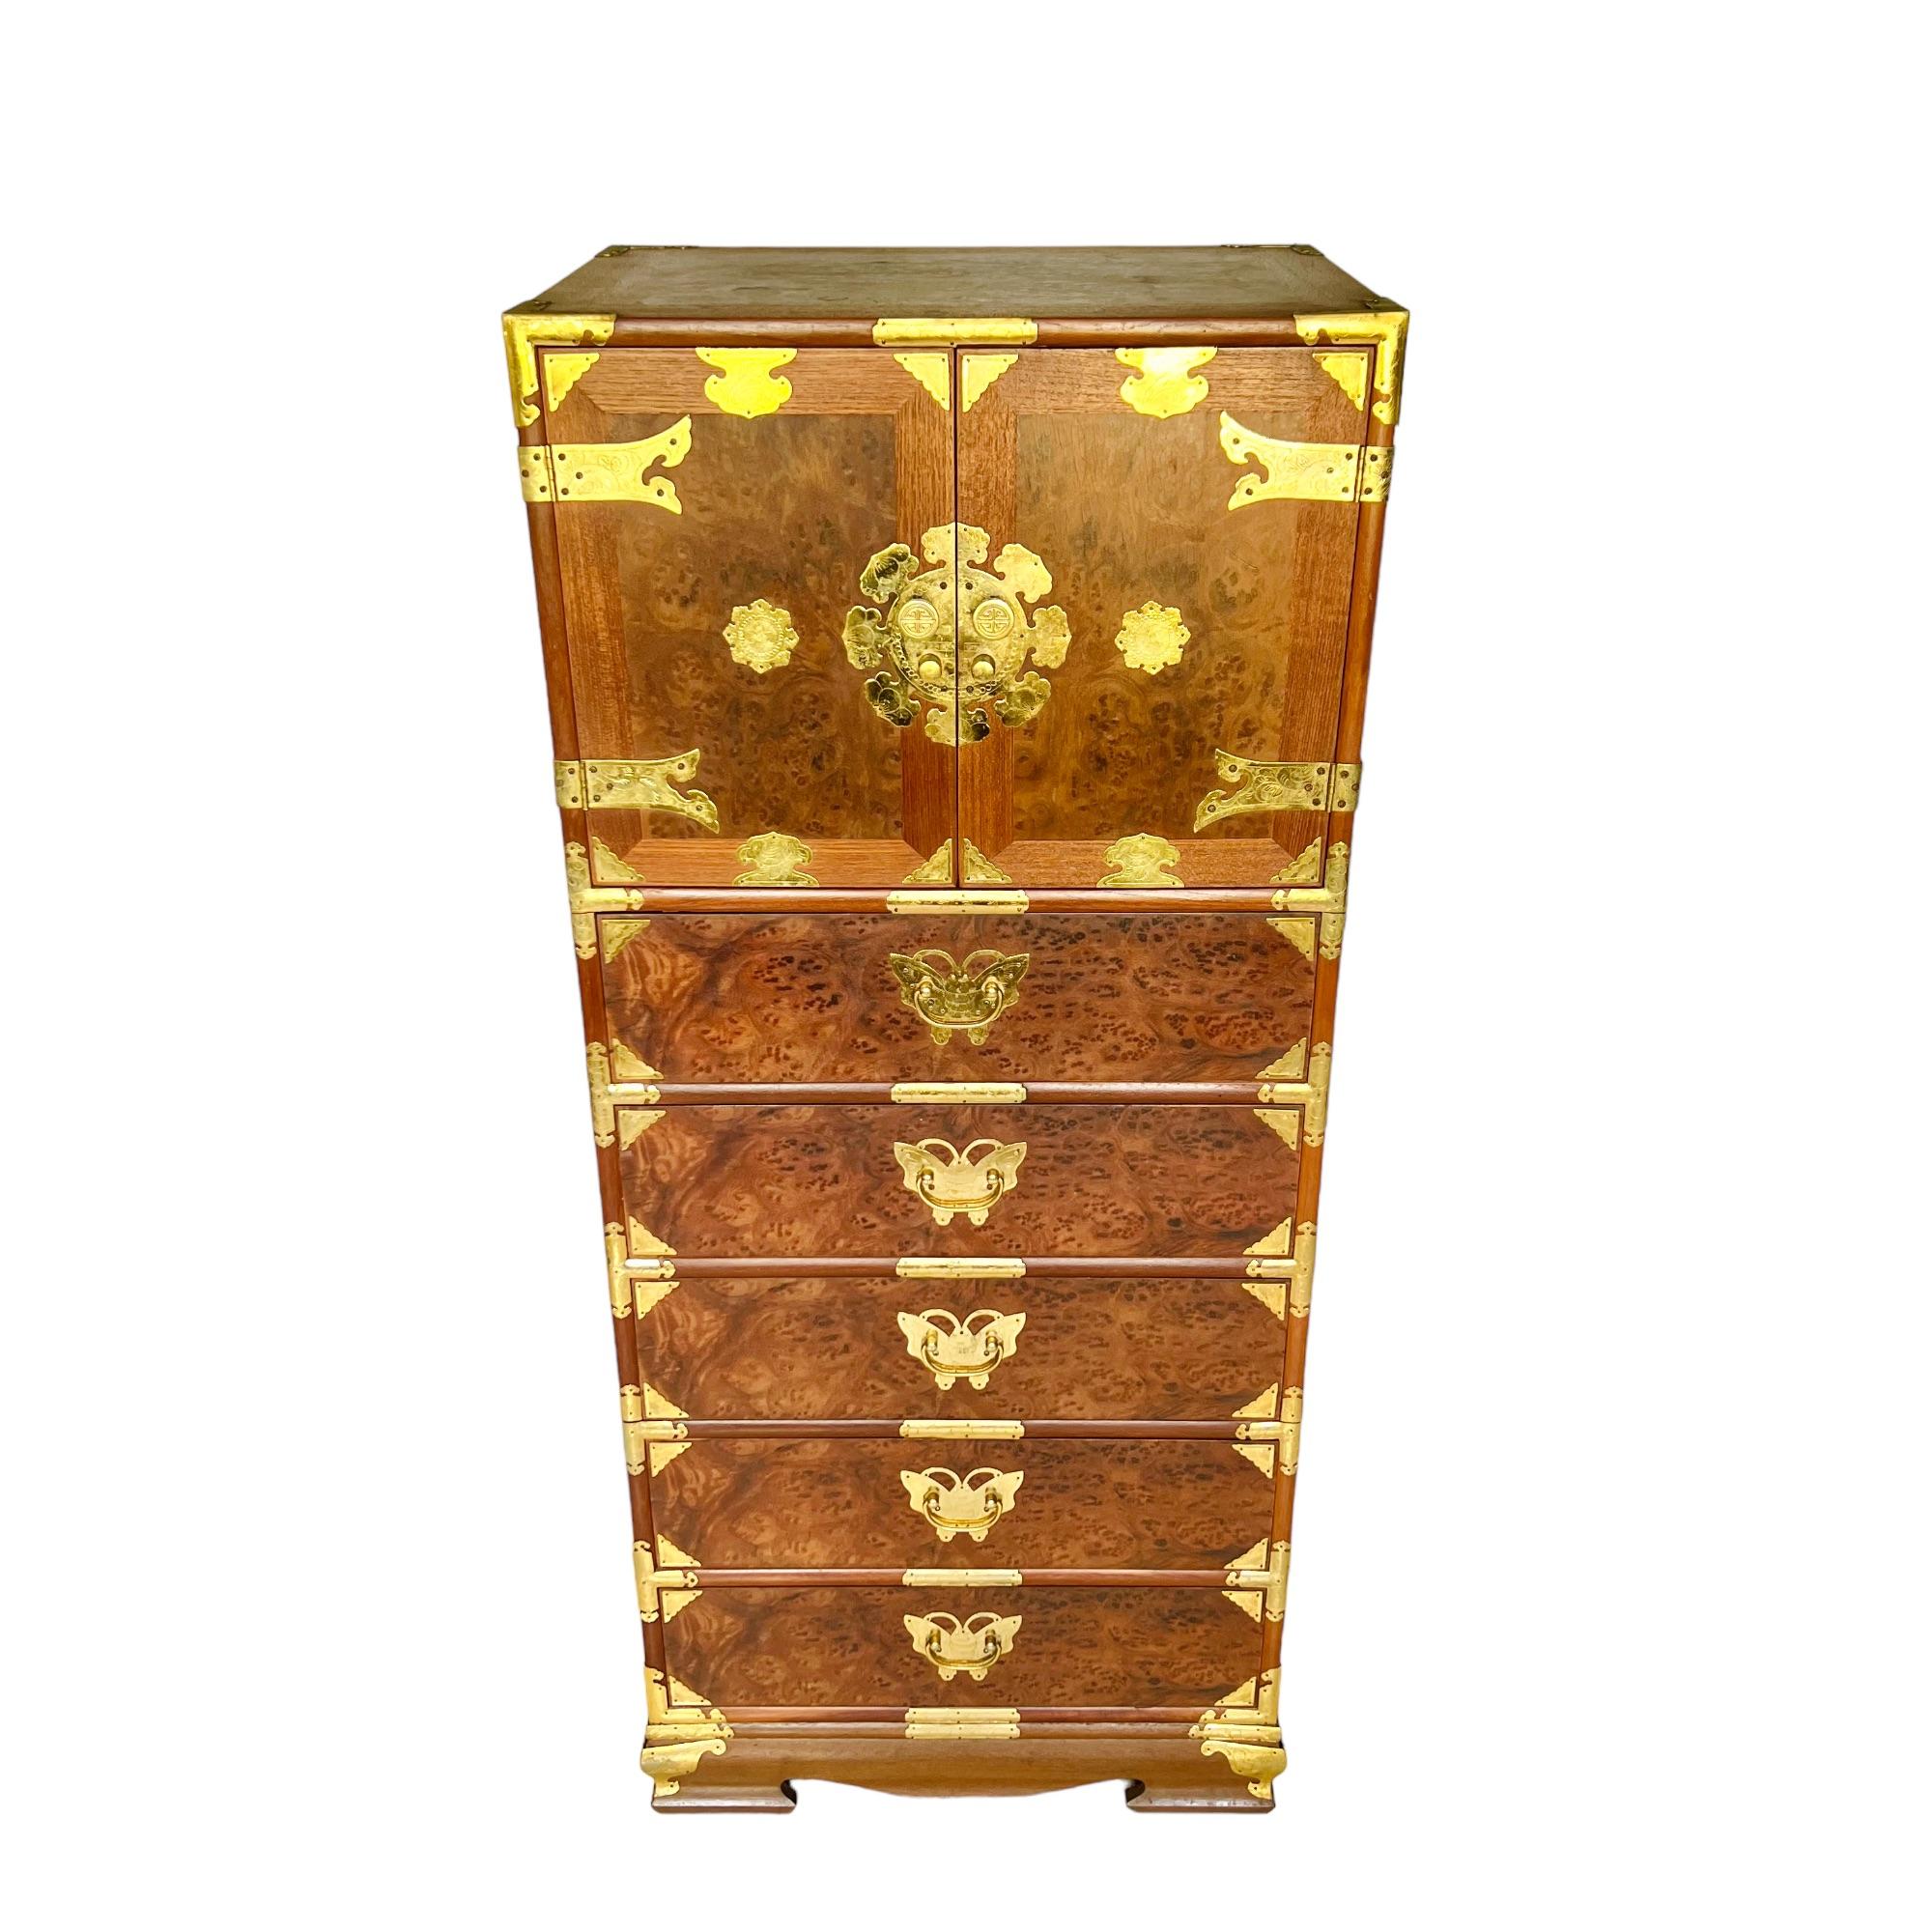 Chinoiserie Chinese Lingerie Chest and Korean Apothecary Cabinet, a Set